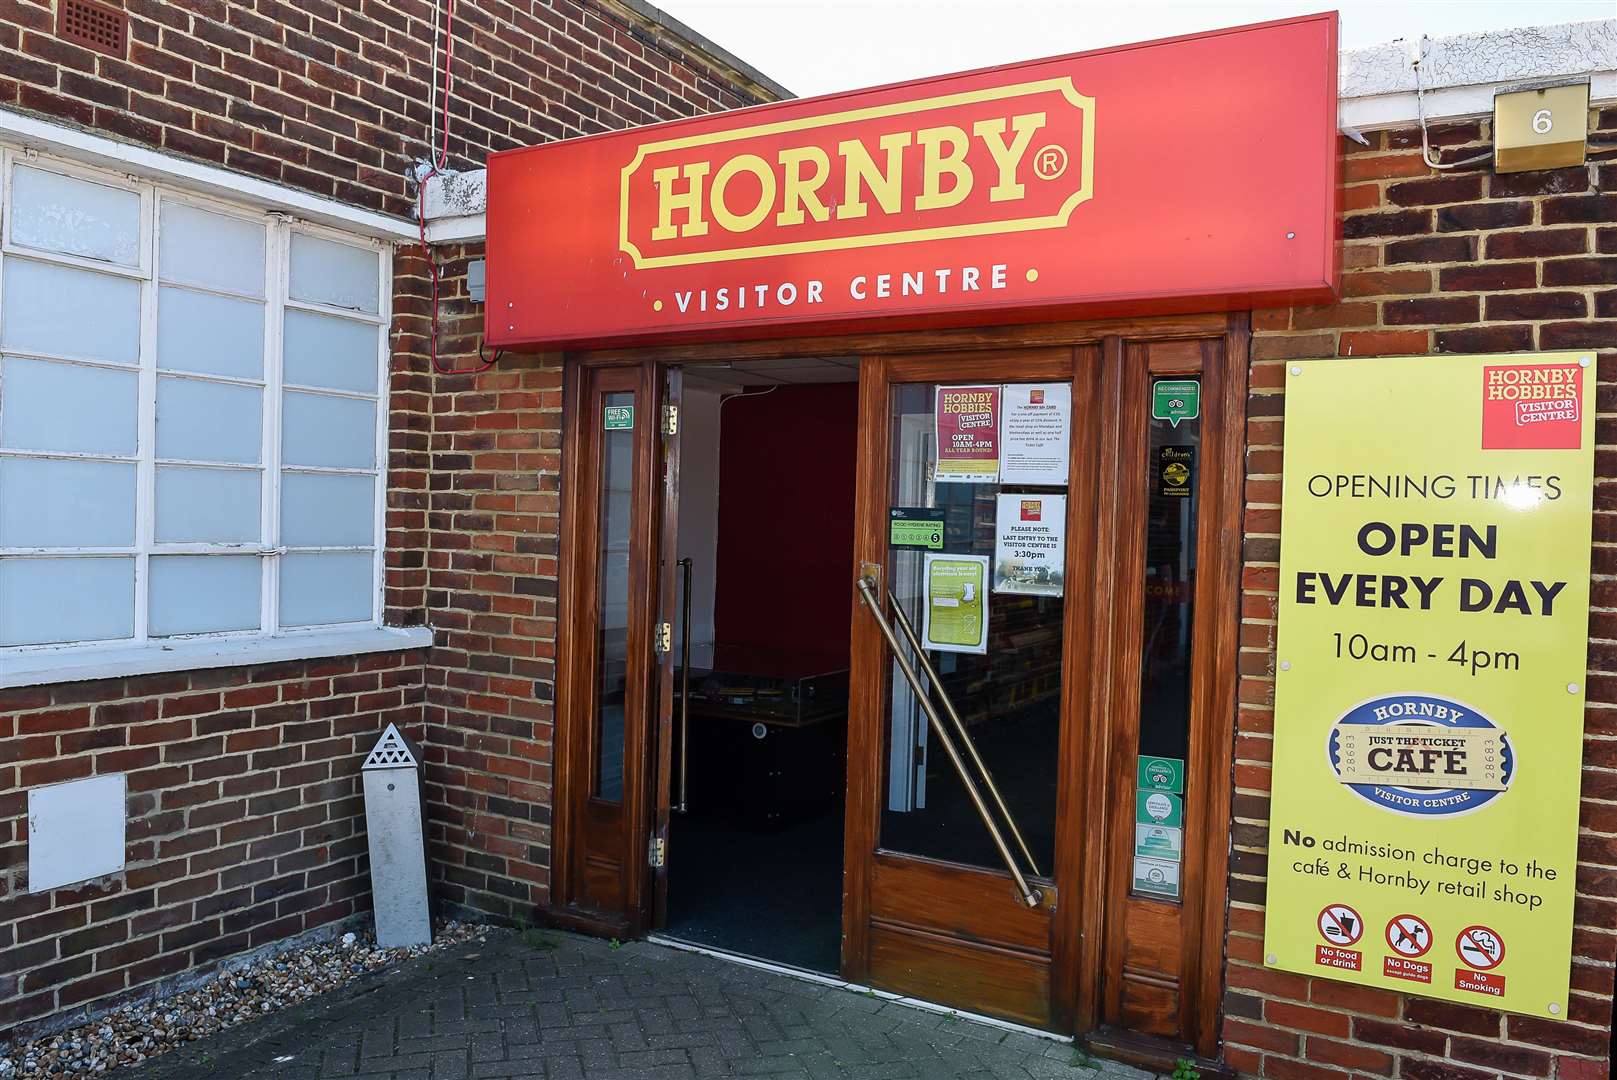 Hornby is headquarted in Margate and has offices around the world